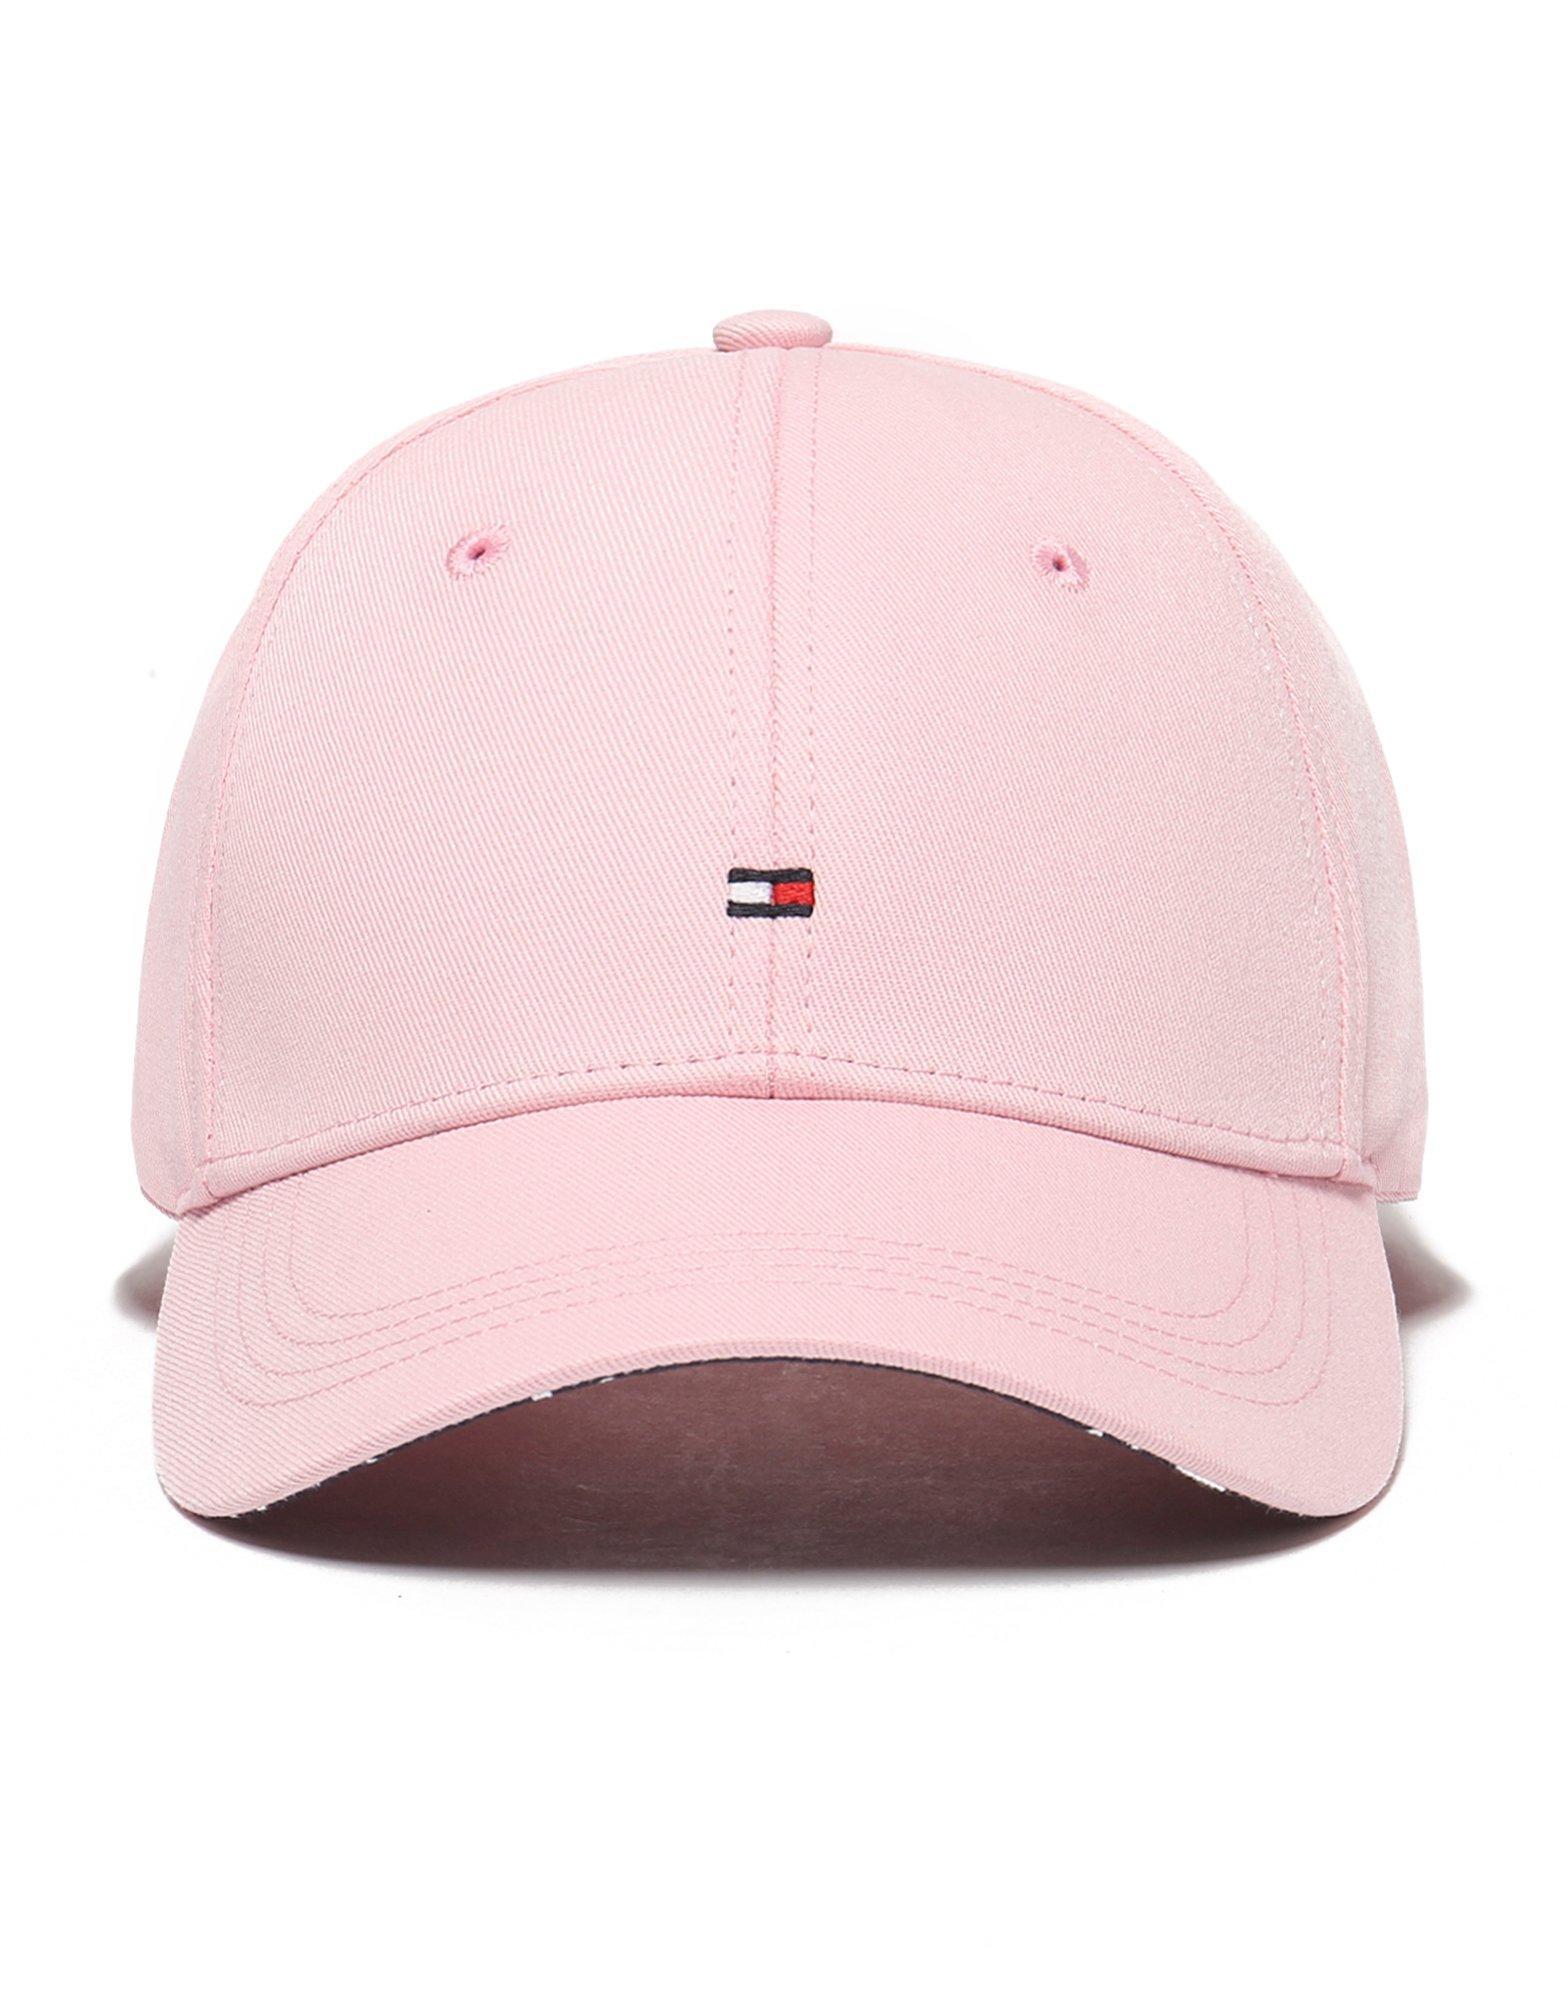 Tommy Hilfiger Cotton Classic Flag Cap in Pink/Navy (Pink) for Men - Lyst